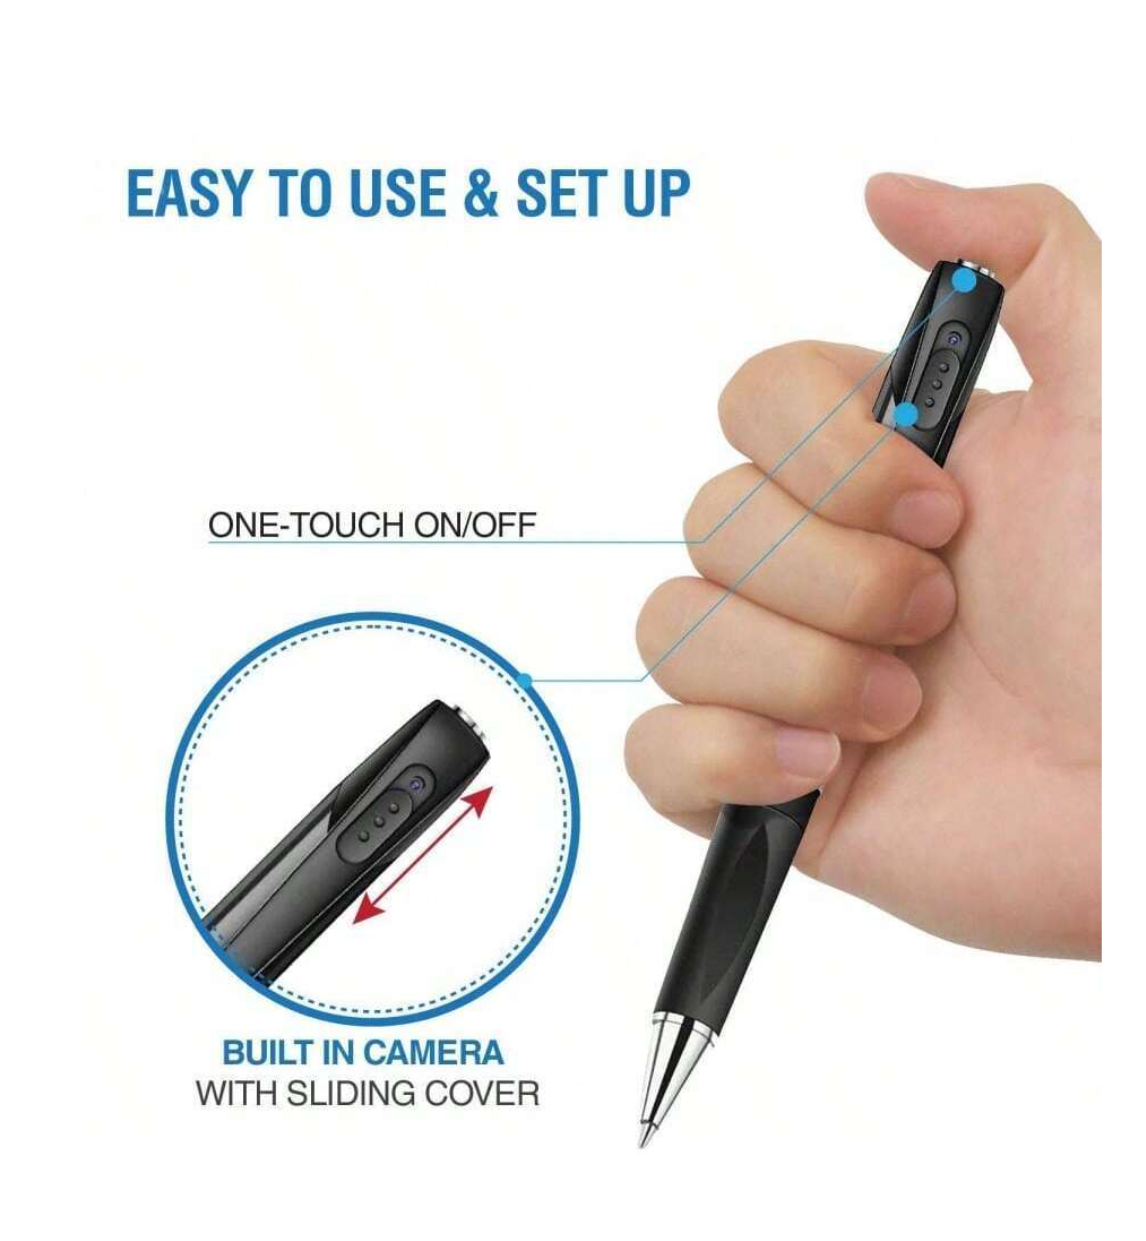 "Sleek Sentinel: 1pc Portable Pen Camera - 1080P HD Video, Indoor/Outdoor Surveillance, Mini Body Cam with 32GB Memory - Ideal for Lectures, Classes, and Business Meetings!" 📷🕵️‍♂️